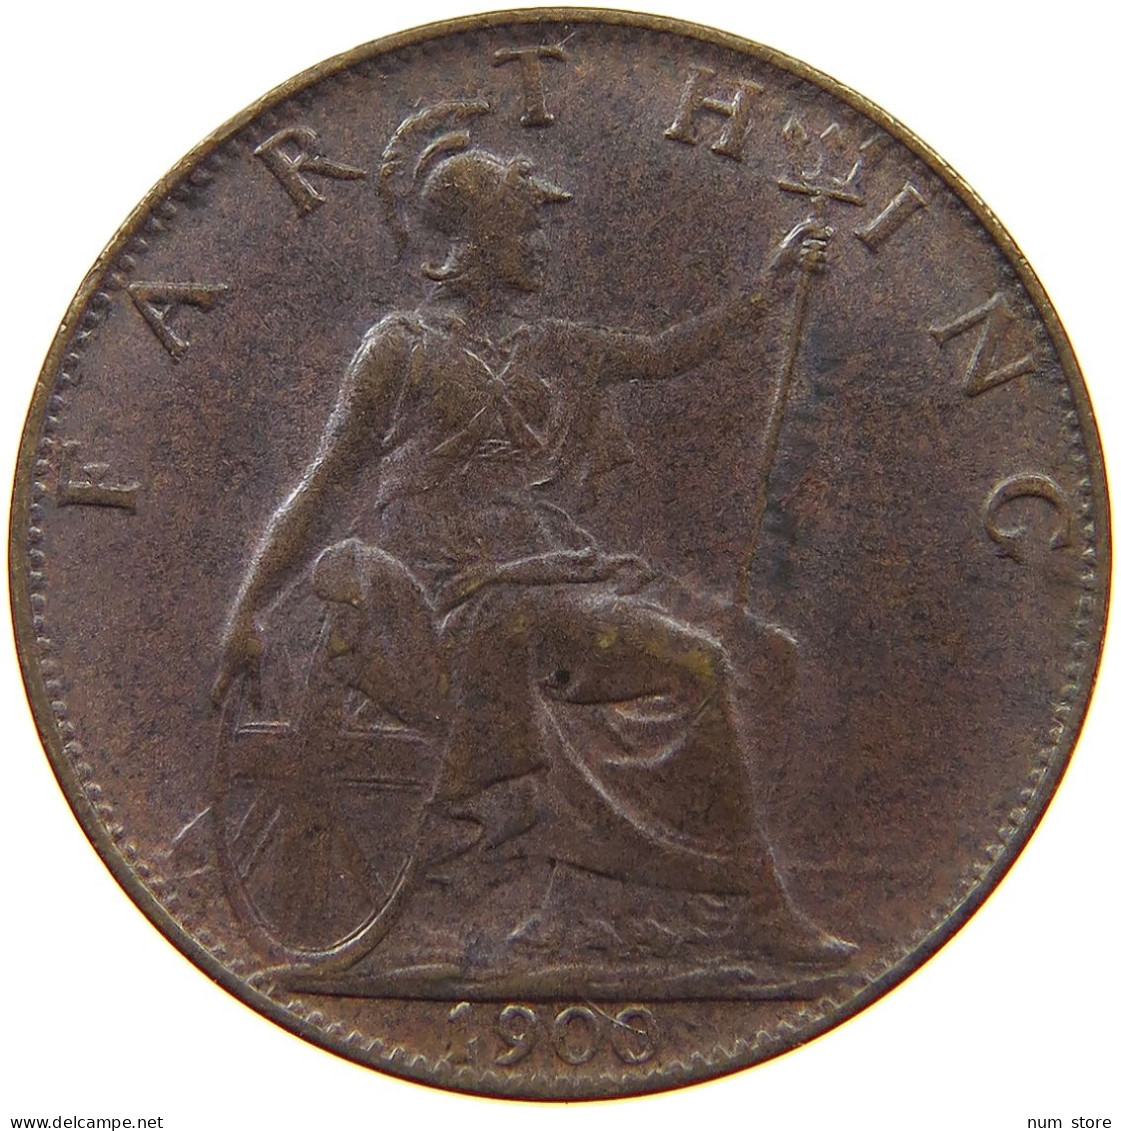 GREAT BRITAIN FARTHING 1900 Victoria 1837-1901 #a011 0967 - B. 1 Farthing